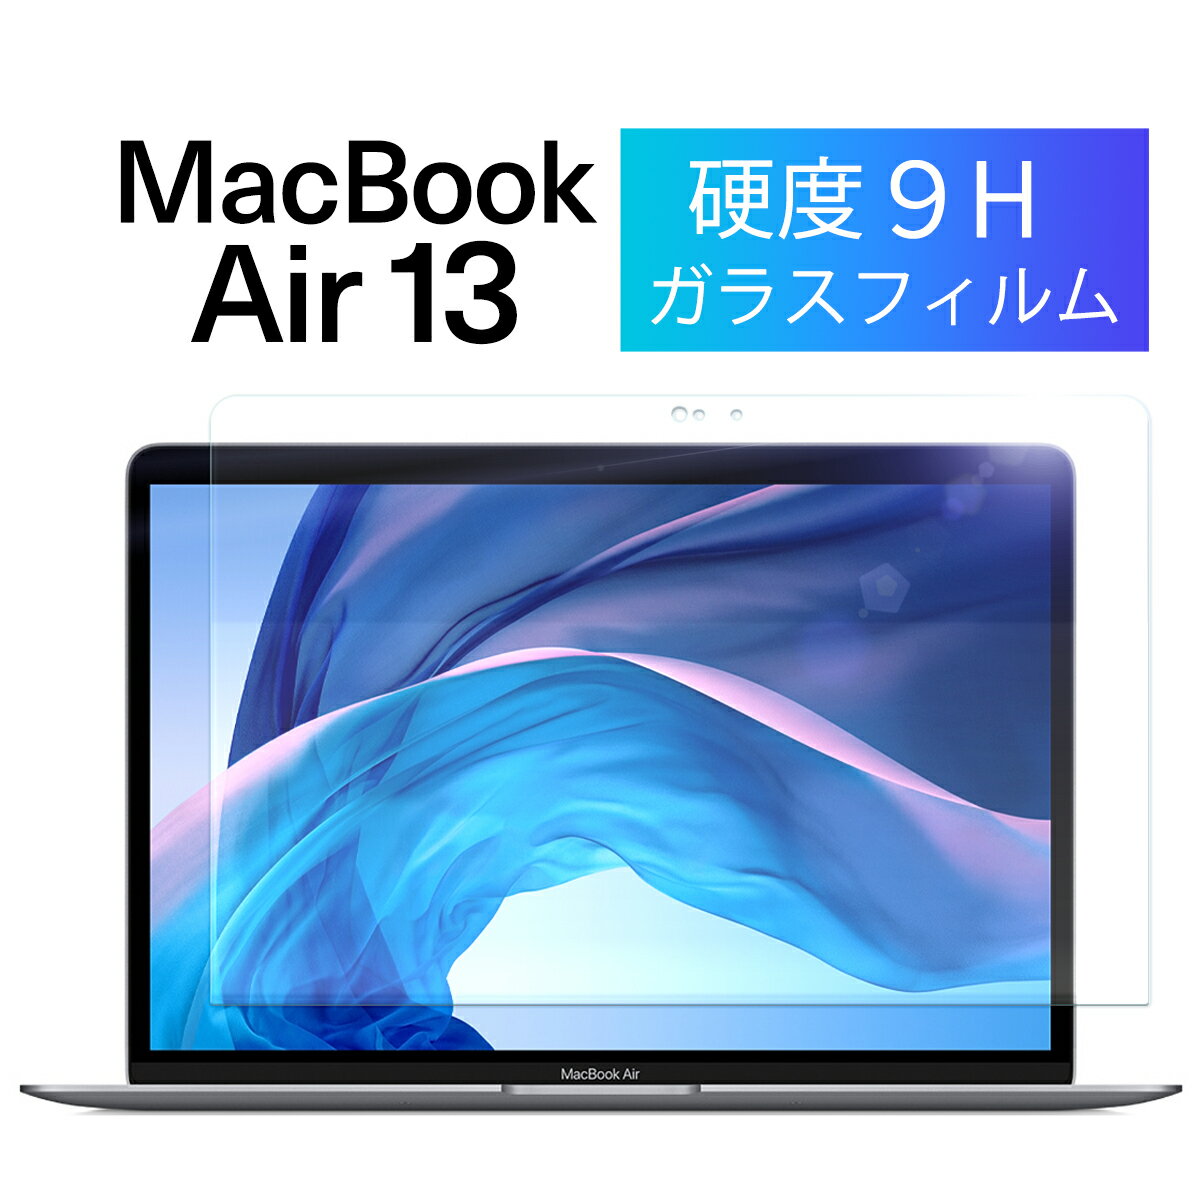 MacBook Air 13 2020年モデル ガラスフィルム A1932 A2179 保護フィルム ガラス 保護 フィルム 画面保護 飛散防止 自己吸着 クリア